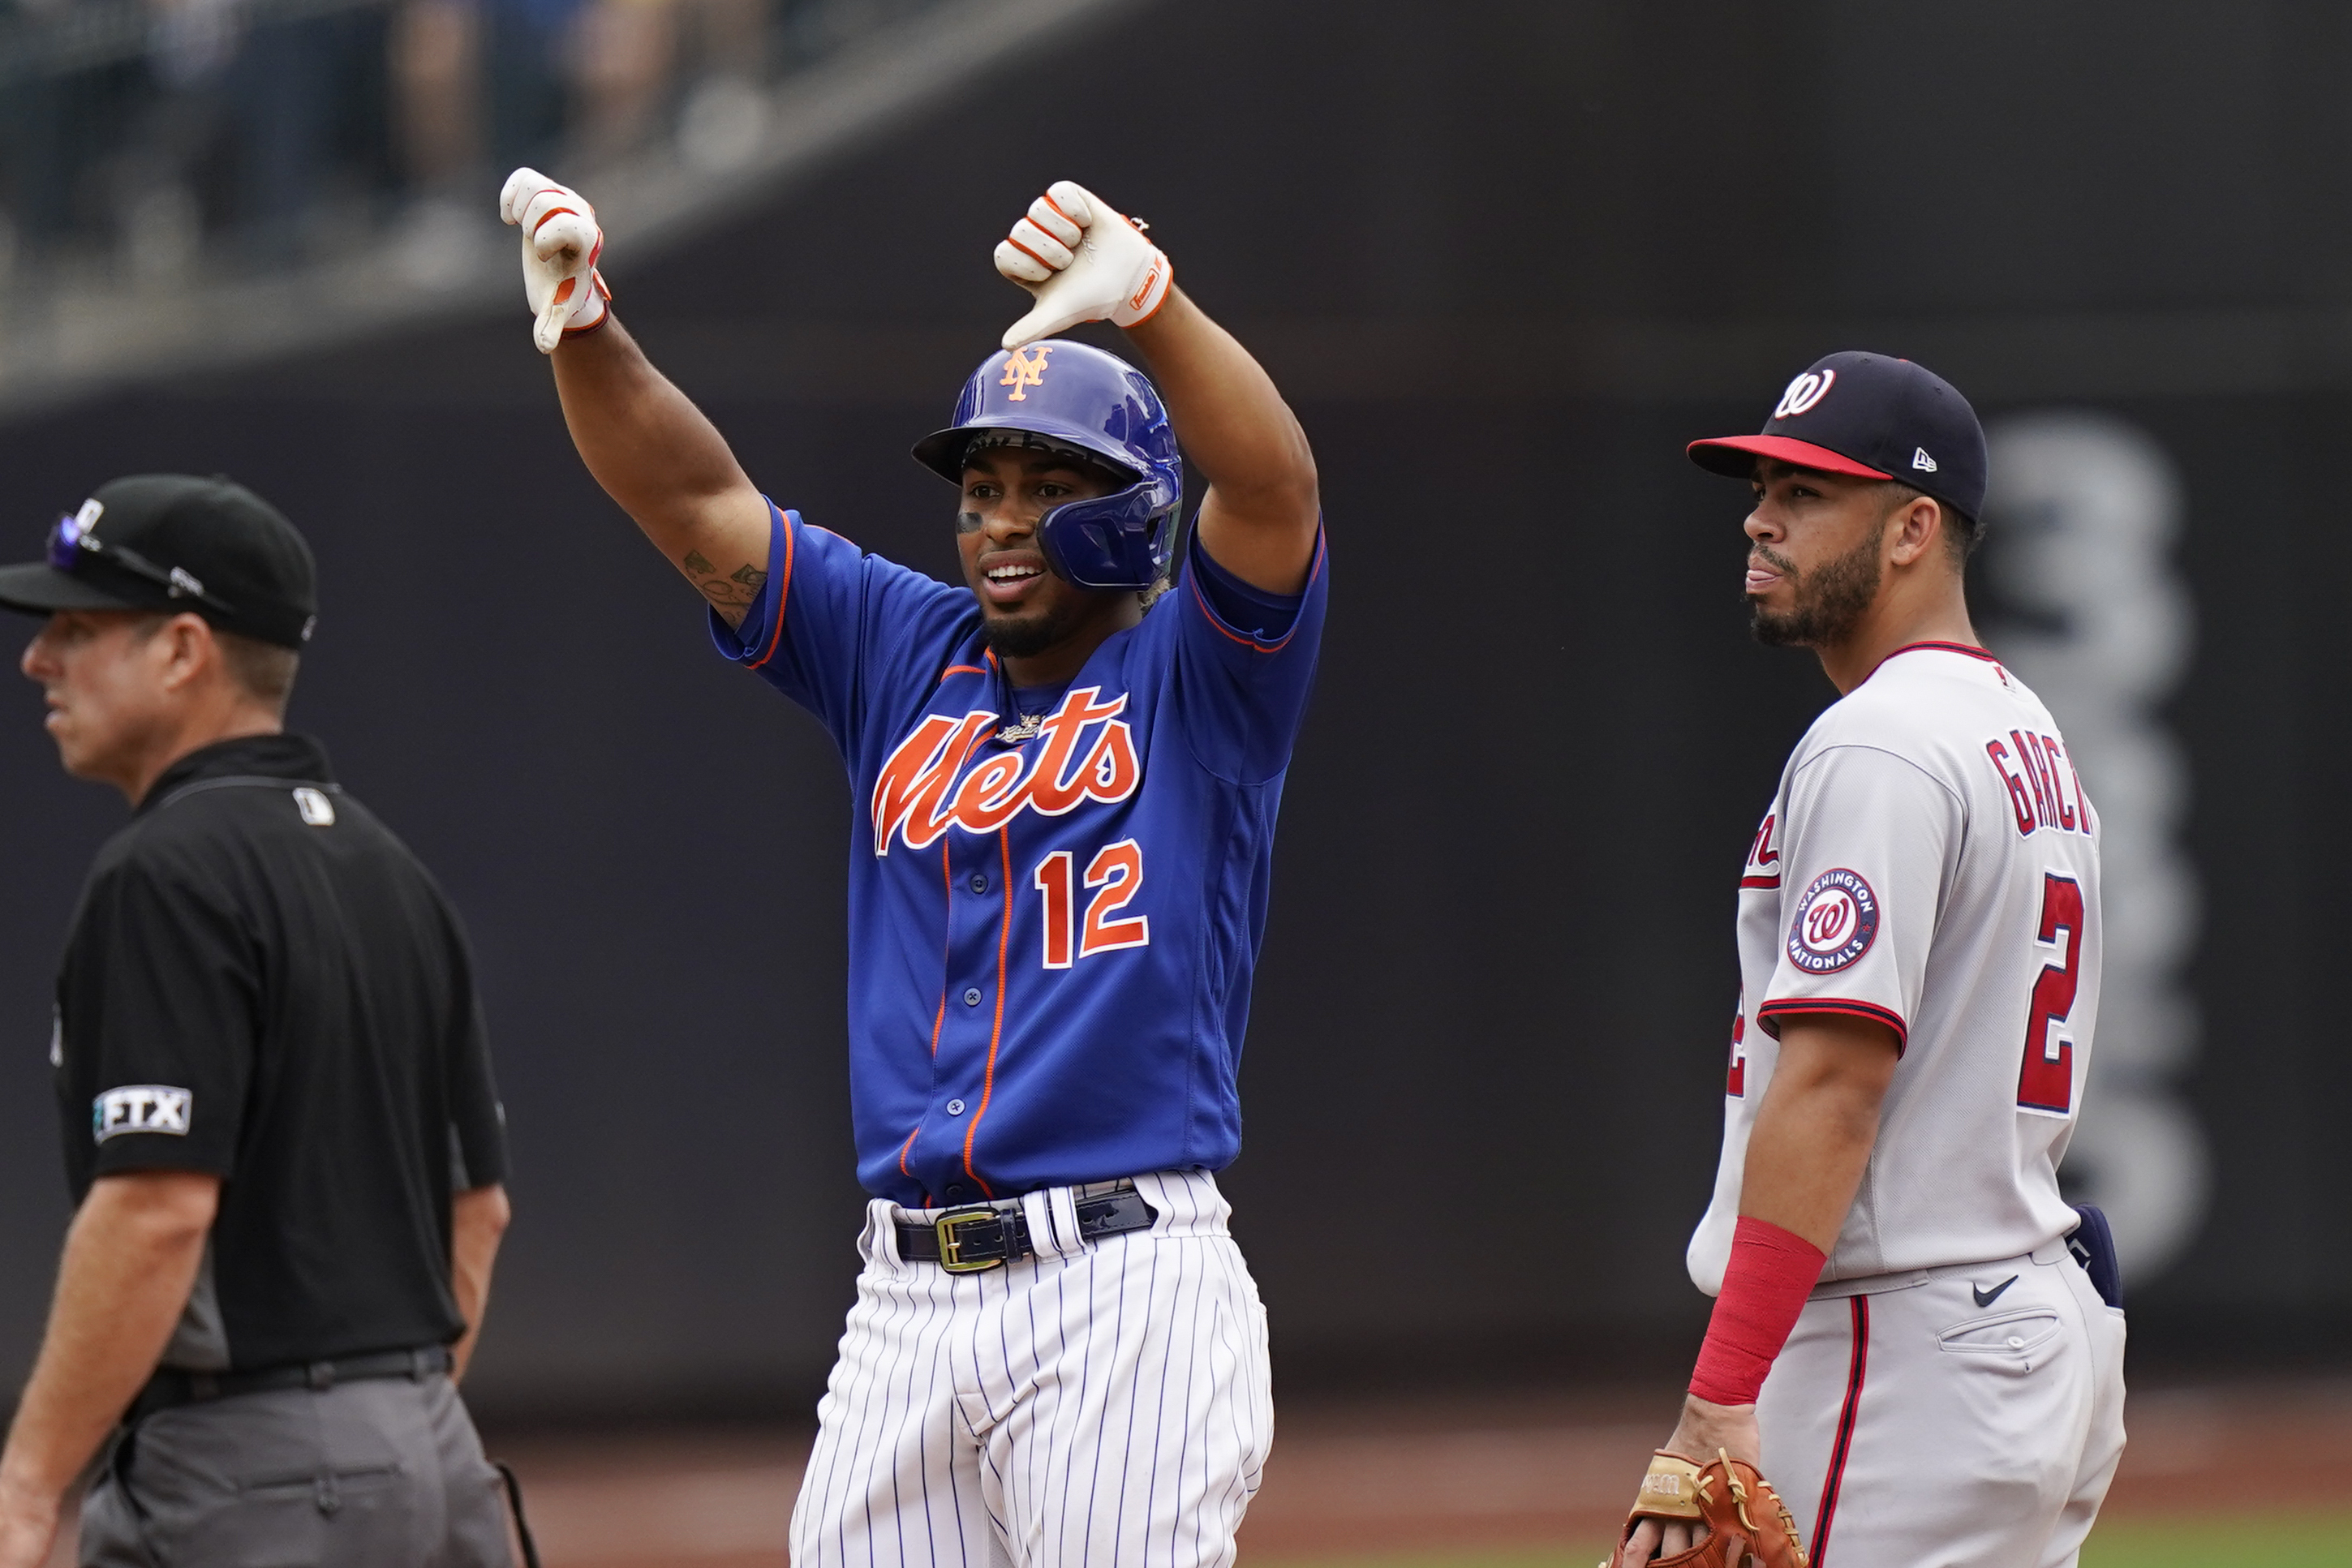 Why New York Mets' playoff hopes come down to Francisco Lindor